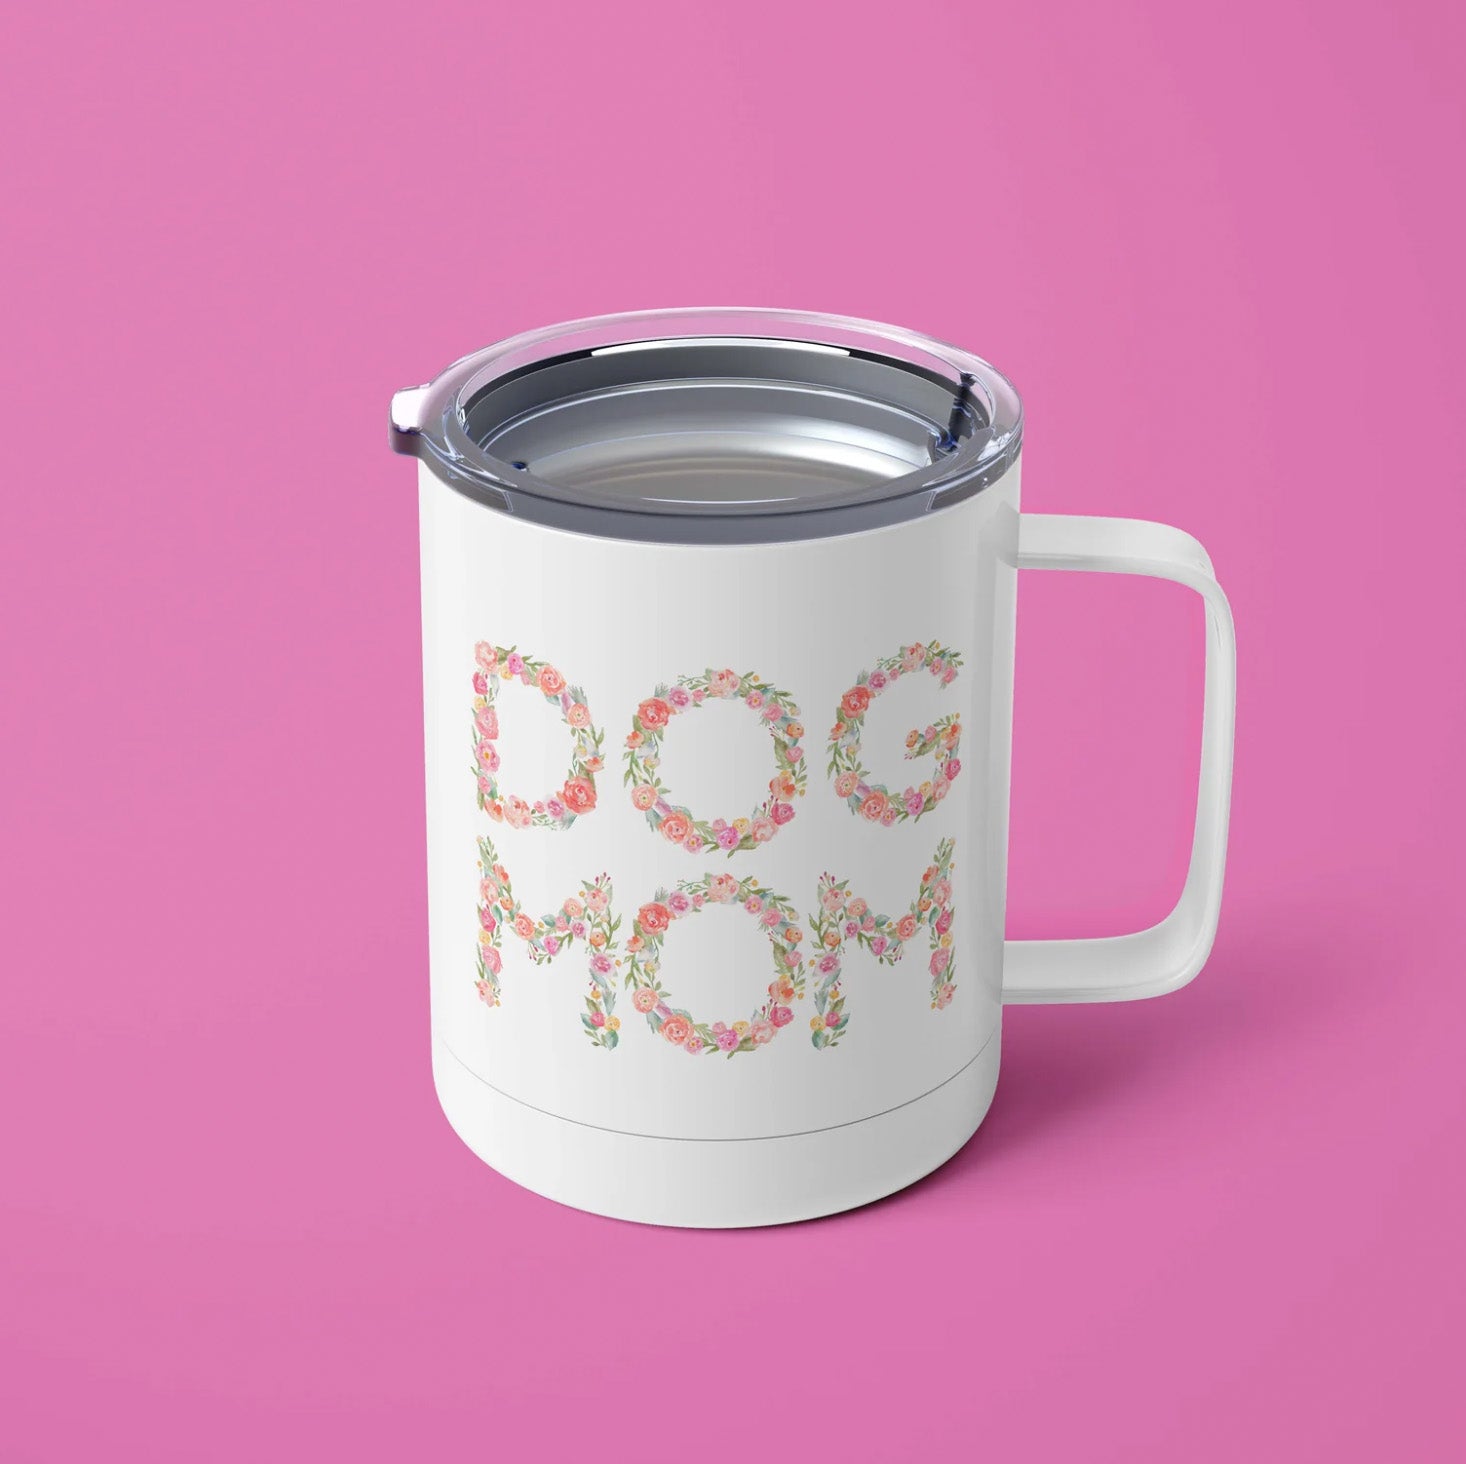 Rockin The Dog Mom Life Happy Mothers Day Tumbler –